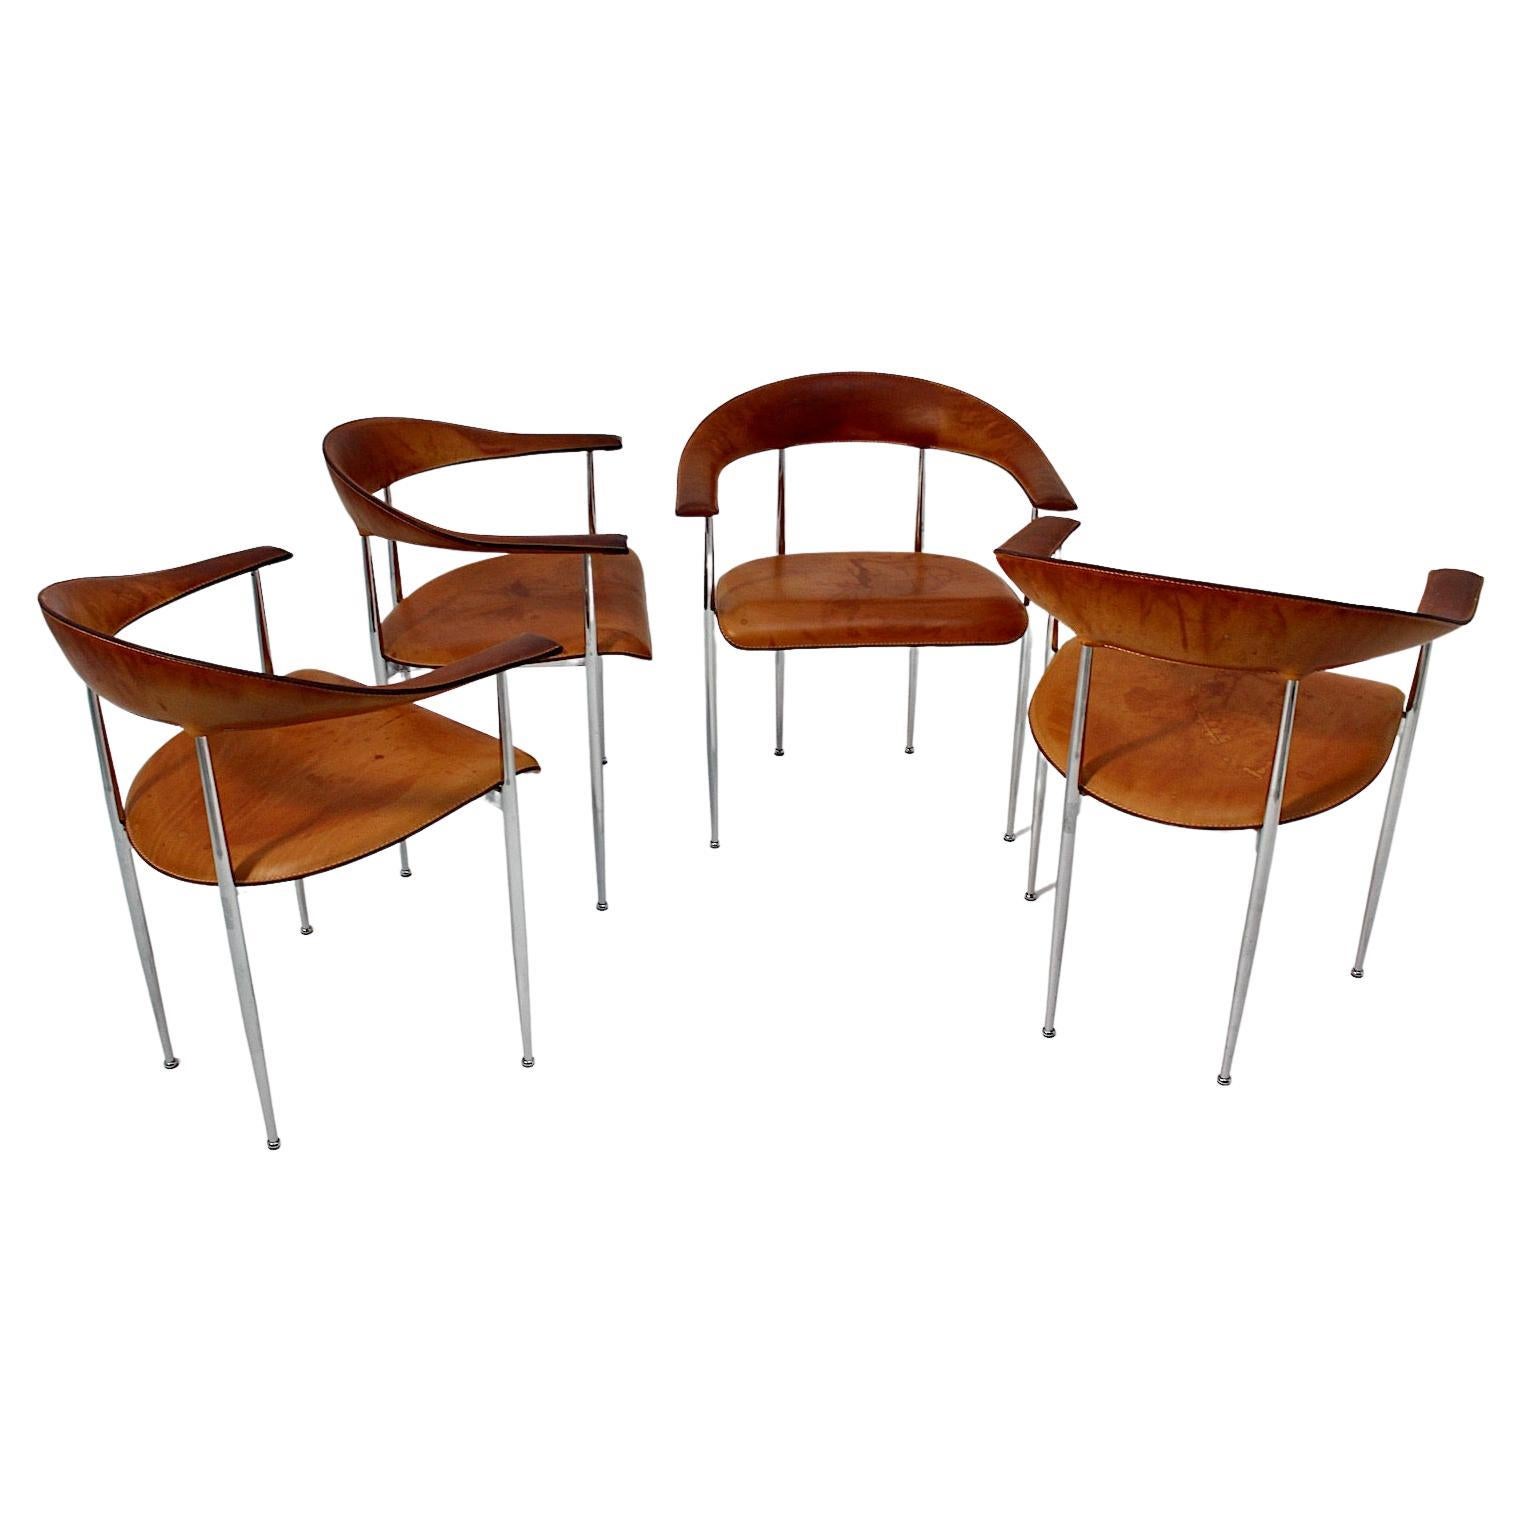 Modernist Vintage Four Dining Chairs Cognac Brown Leather Chrome, 1980s, Italy For Sale